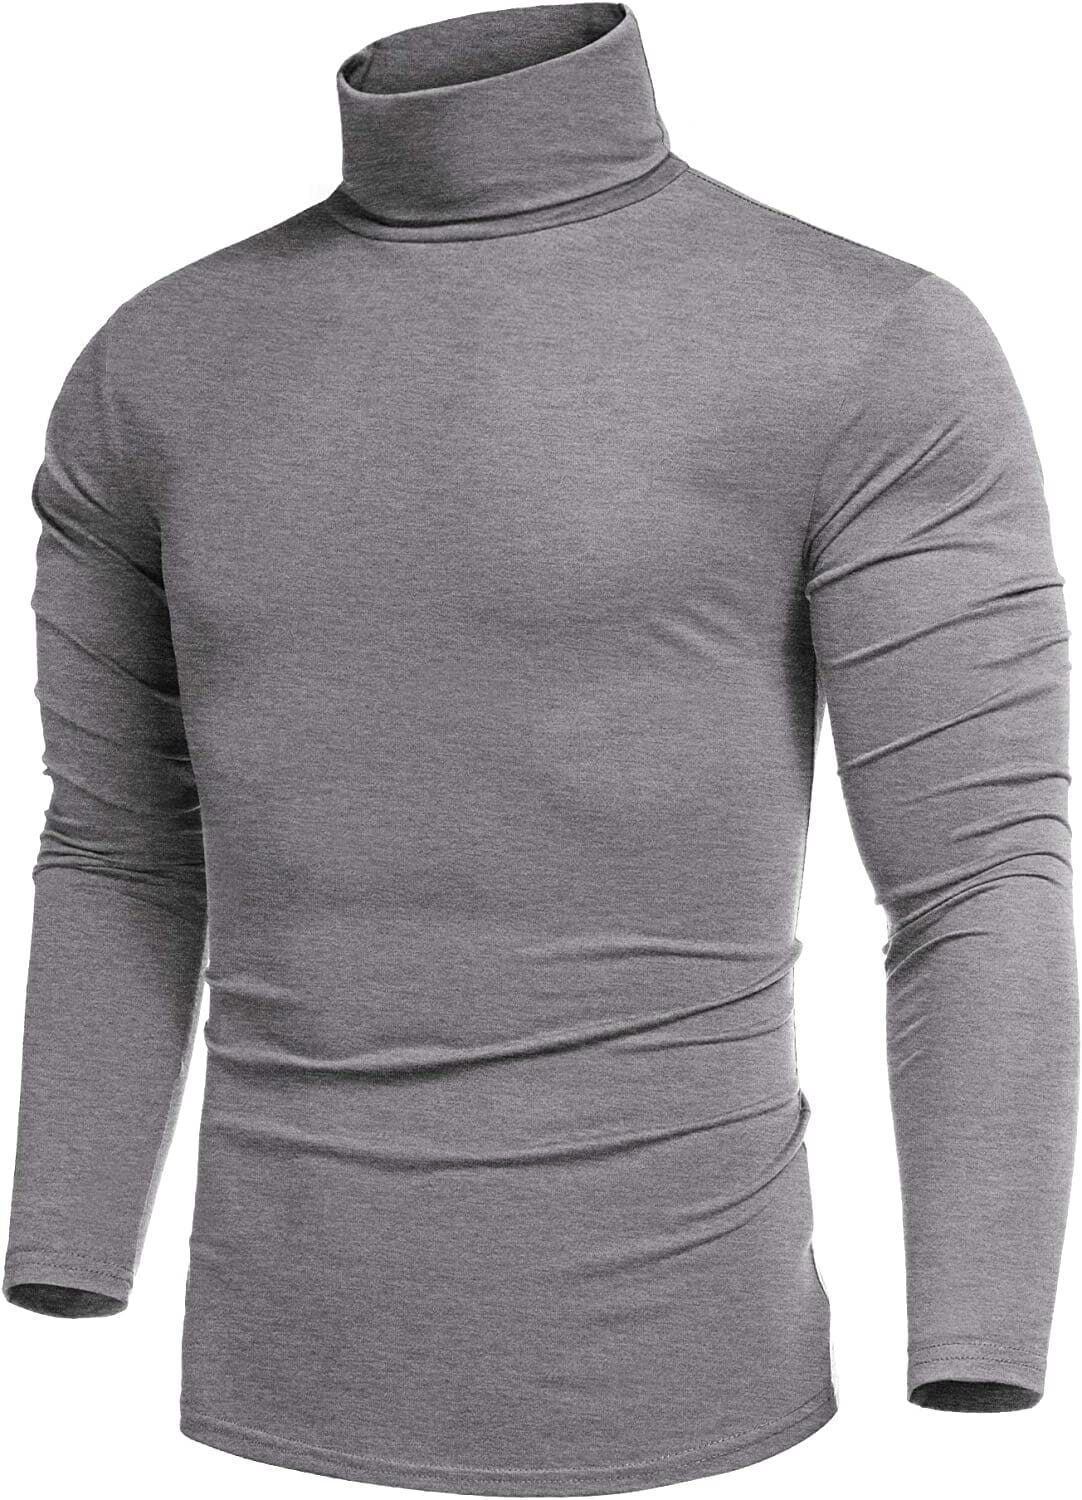 Slim Fit Turtleneck Basic Cotton Sweater (US Only) Sweaters COOFANDY Store Grey S 